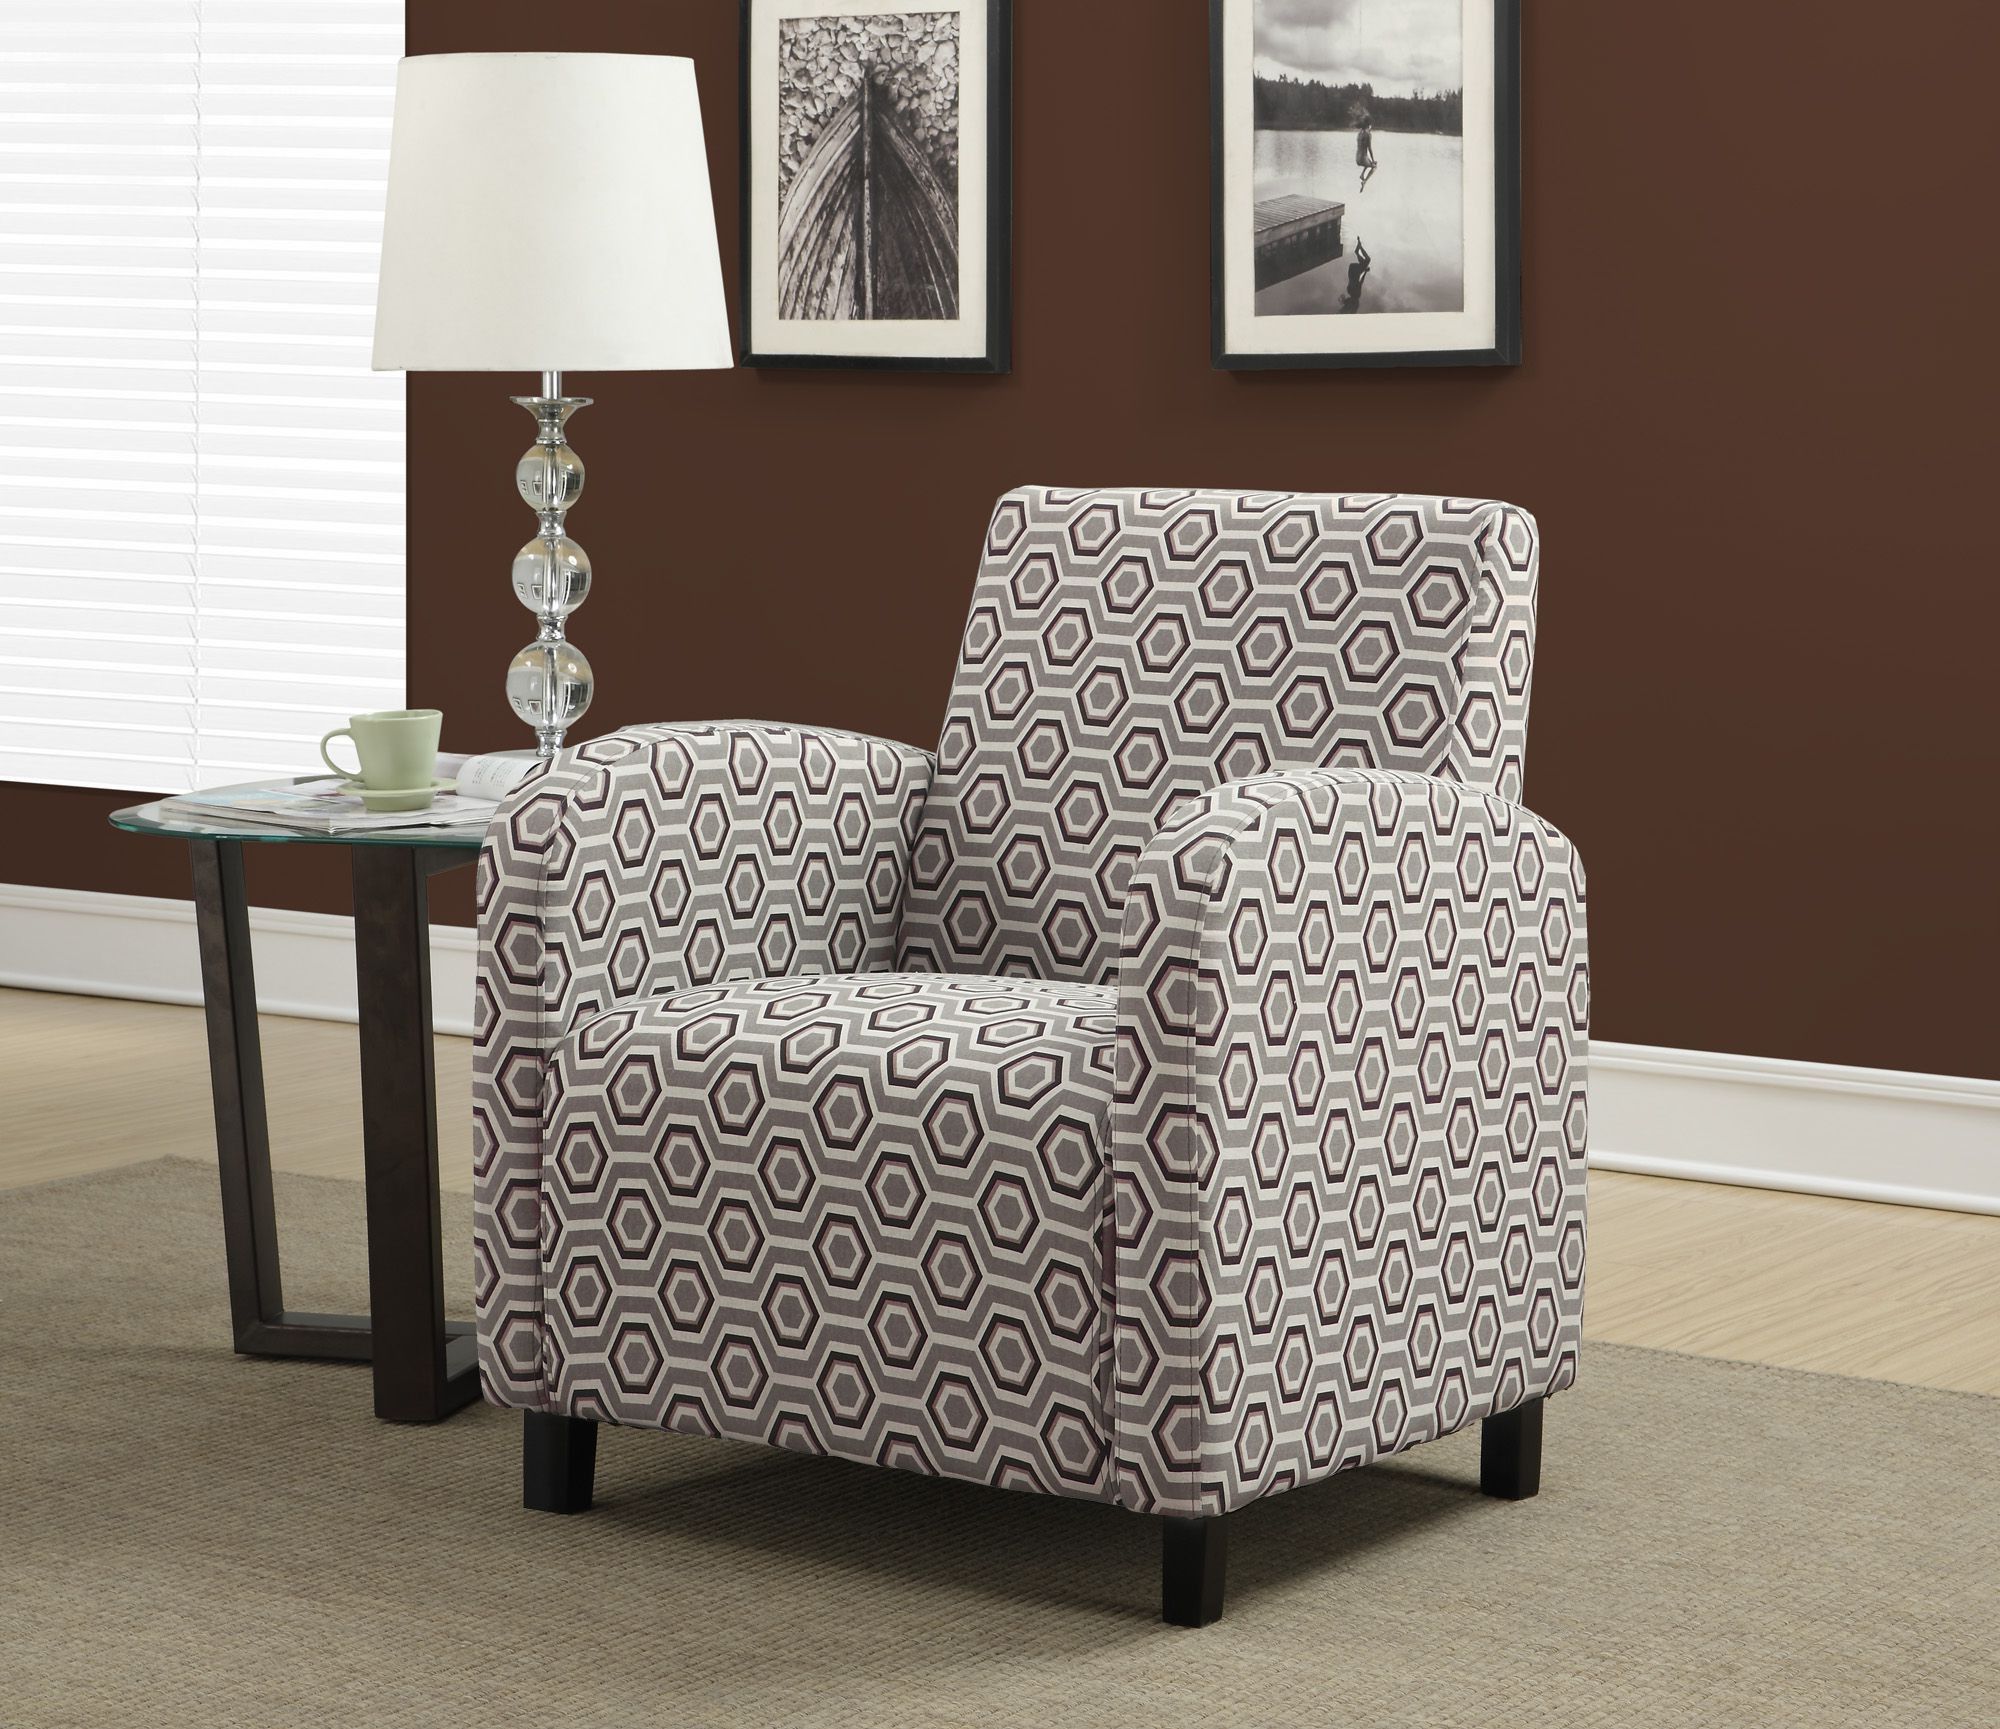 Gray Chenille Fabric Accent Stools With Well Known Gray / Earth Tone Hexagon Fabric Accent Chair From Monarch ( (View 10 of 10)